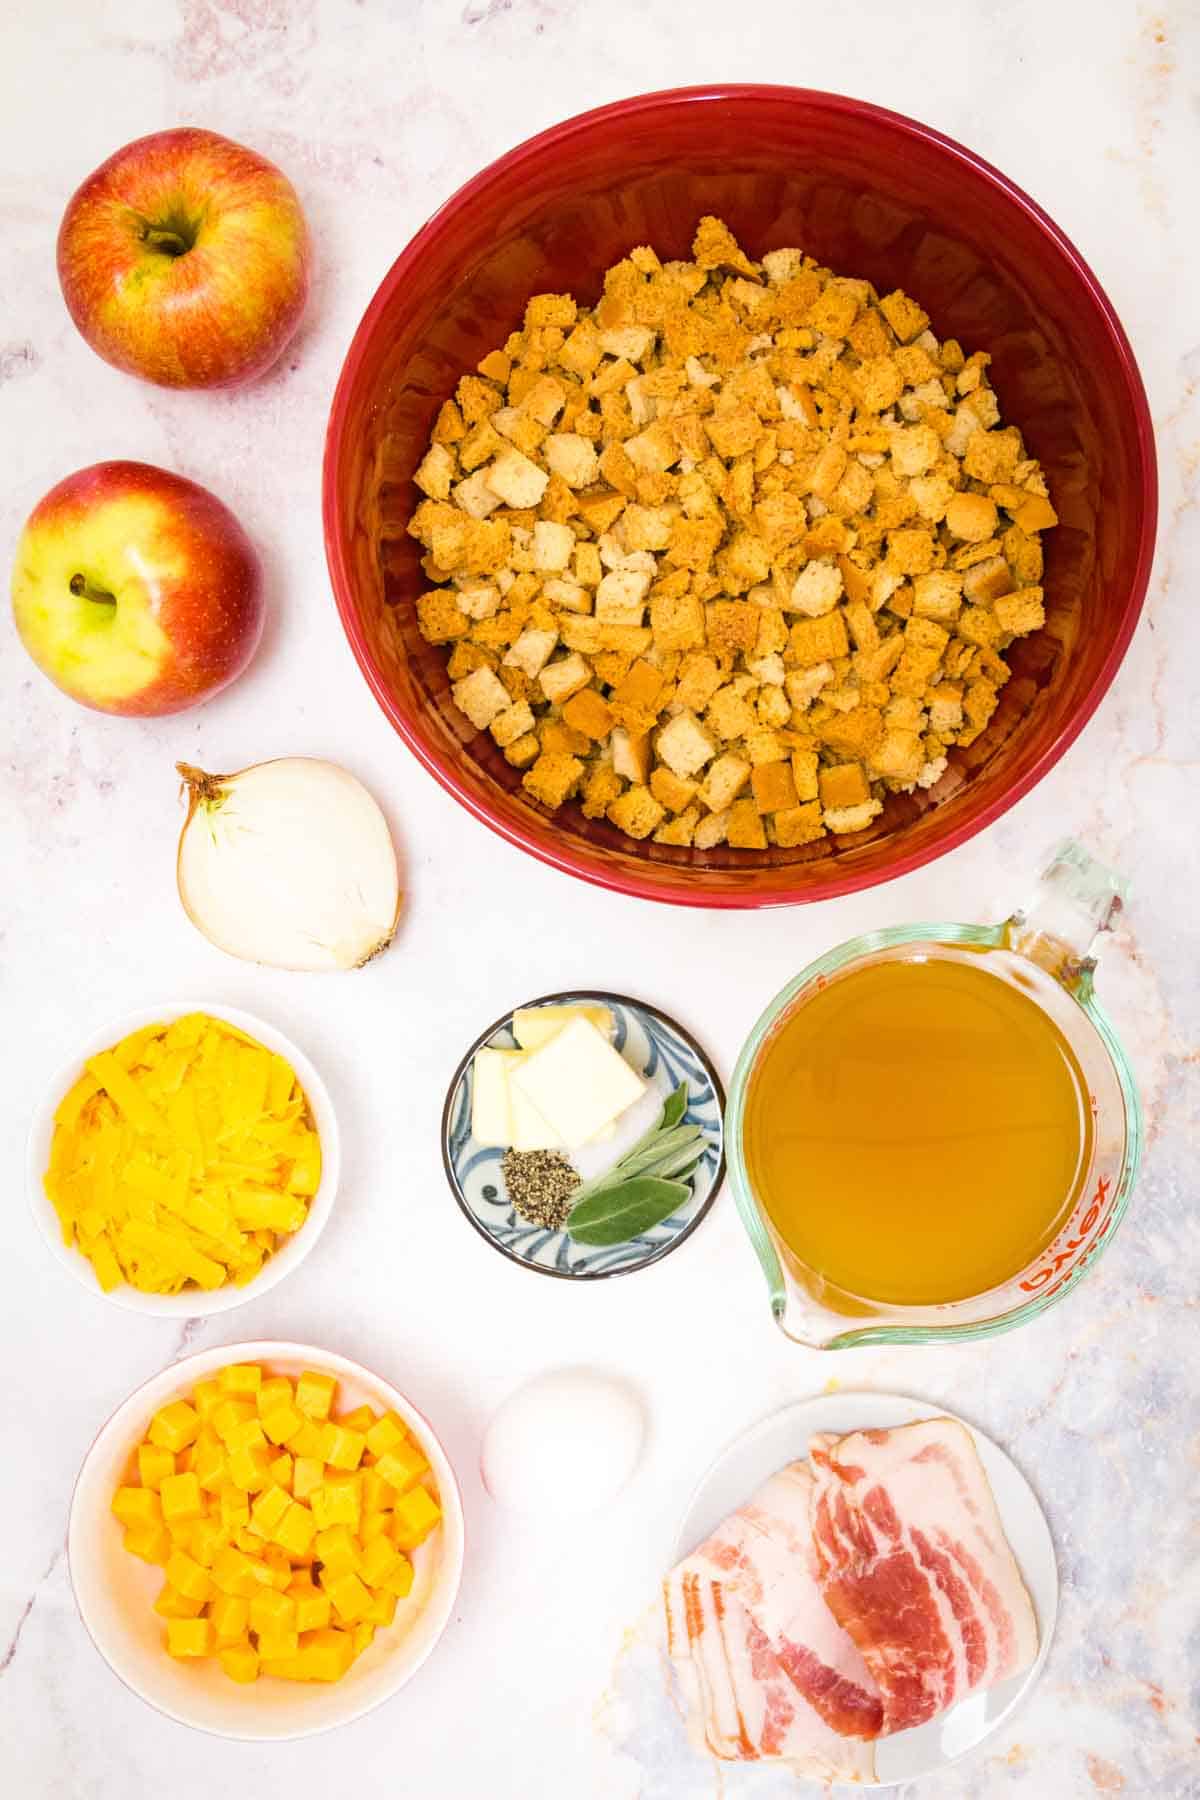 Ingredients for gluten free apple stuffing are shown portioned out: stuffing mix, apples, bacon, broth, cheddar cheese, butter, seasonings.